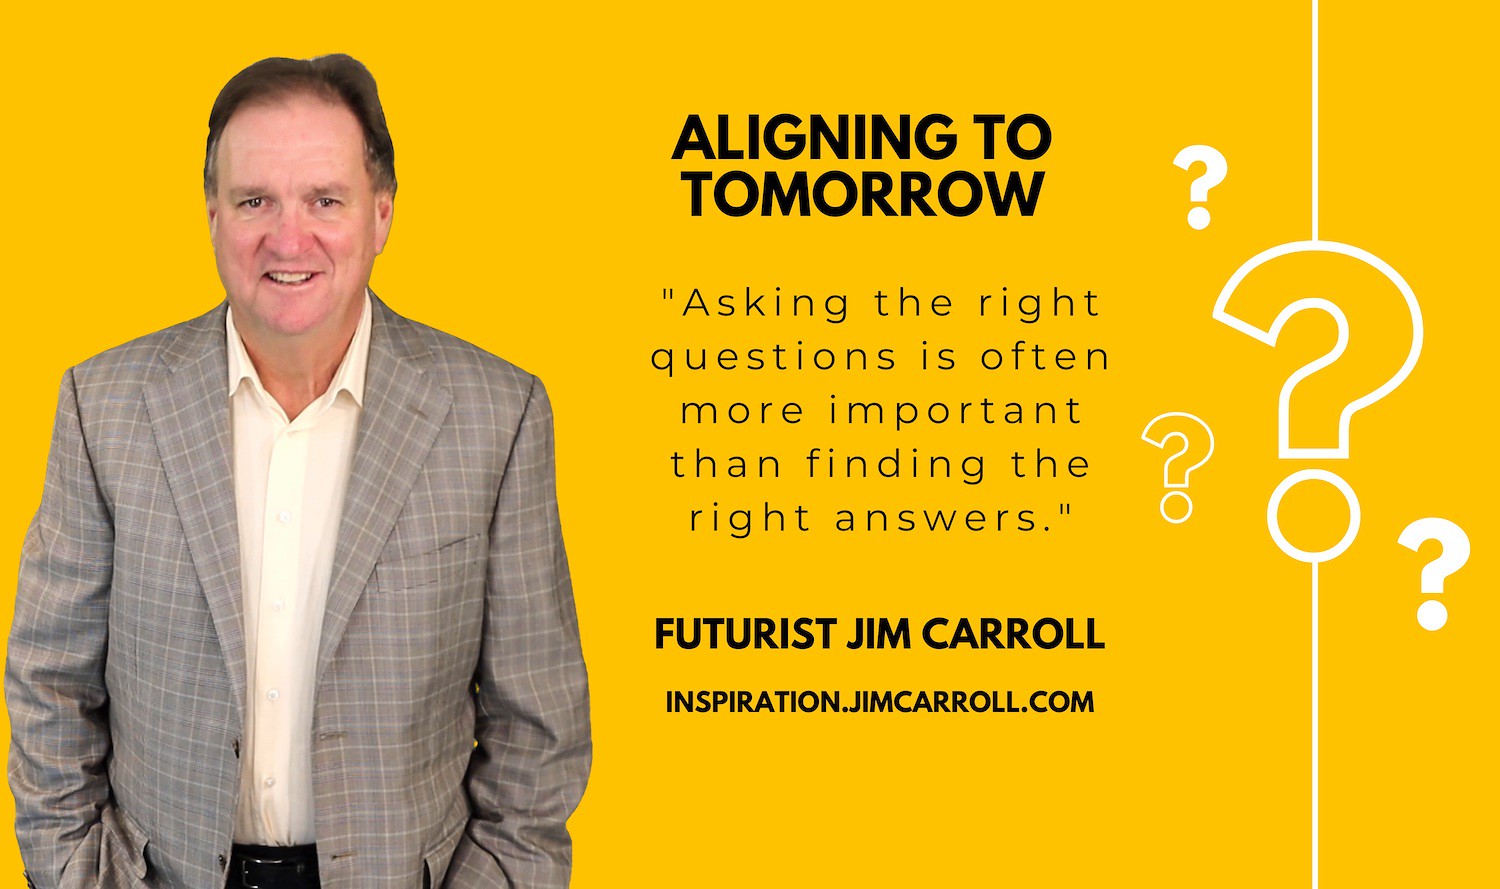 "Asking the right questions is often more important than finding the right answers." - Futurist Jim Carroll